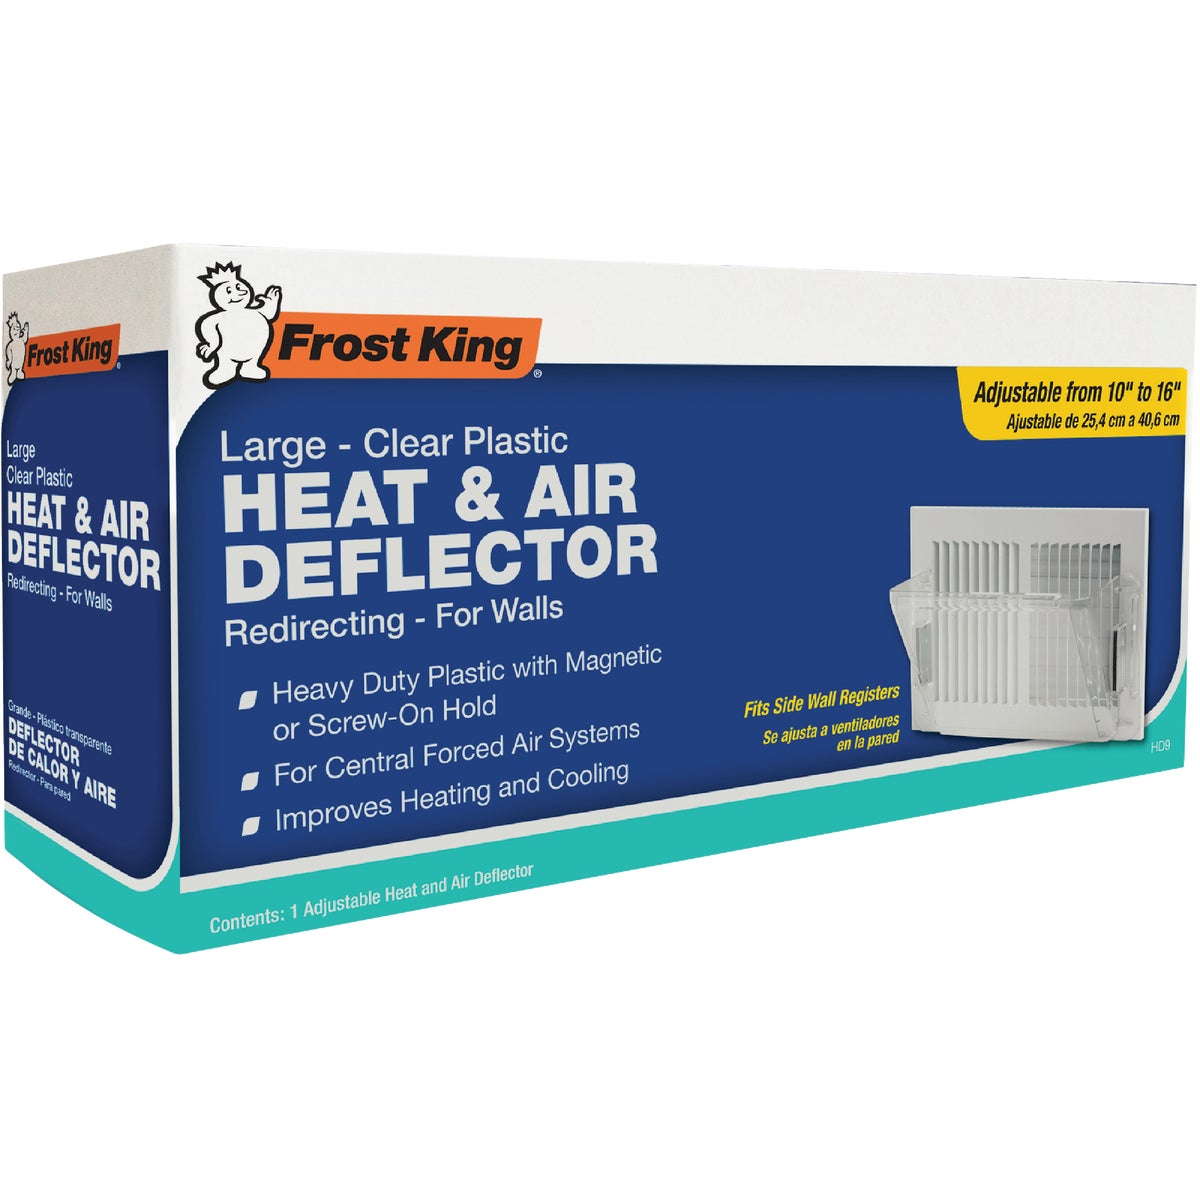 Item 437058, Frost King's heat and air deflectors make the distribution of air 